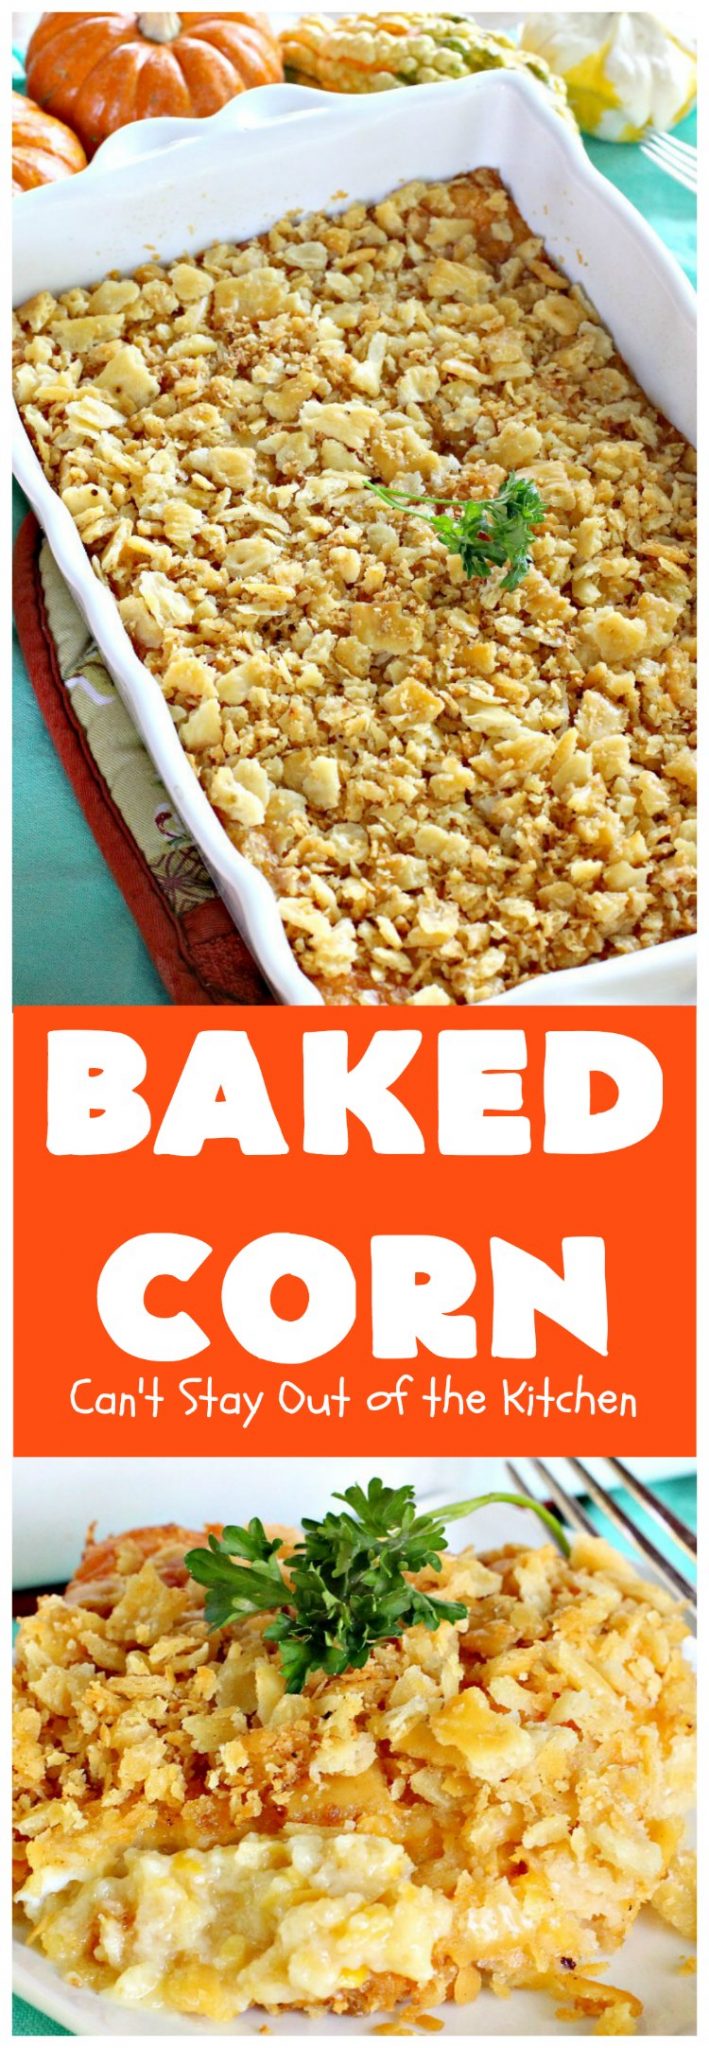 Baked Corn – Can't Stay Out of the Kitchen